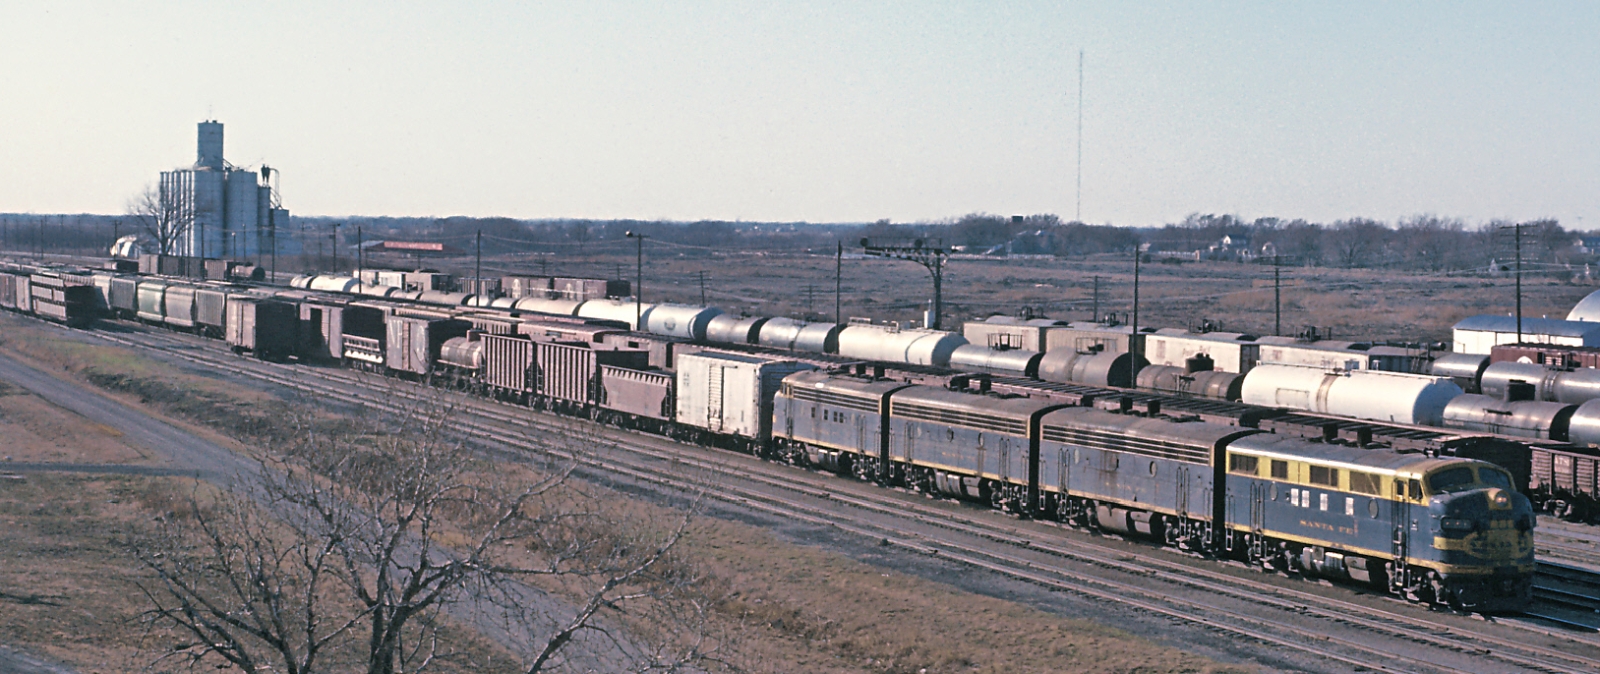 A four-part F3 in 1972 in a Santa Fe freight yard